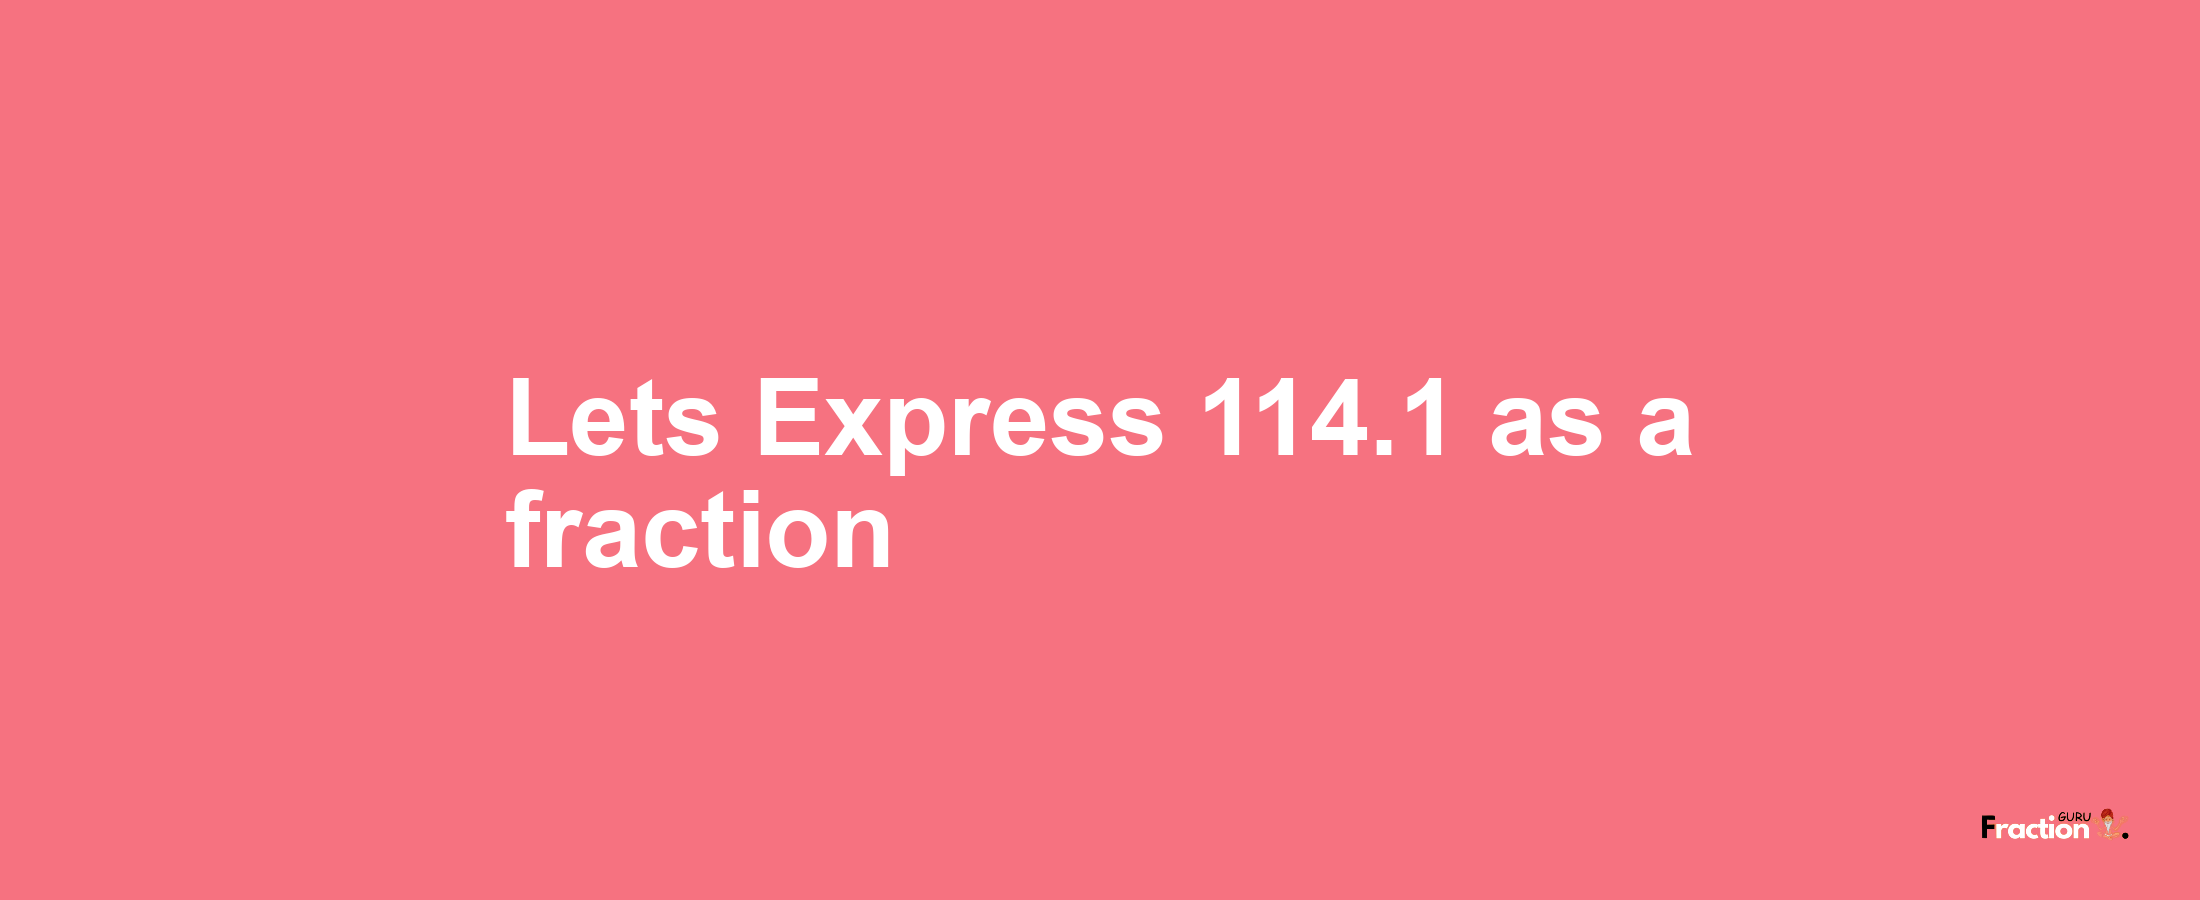 Lets Express 114.1 as afraction